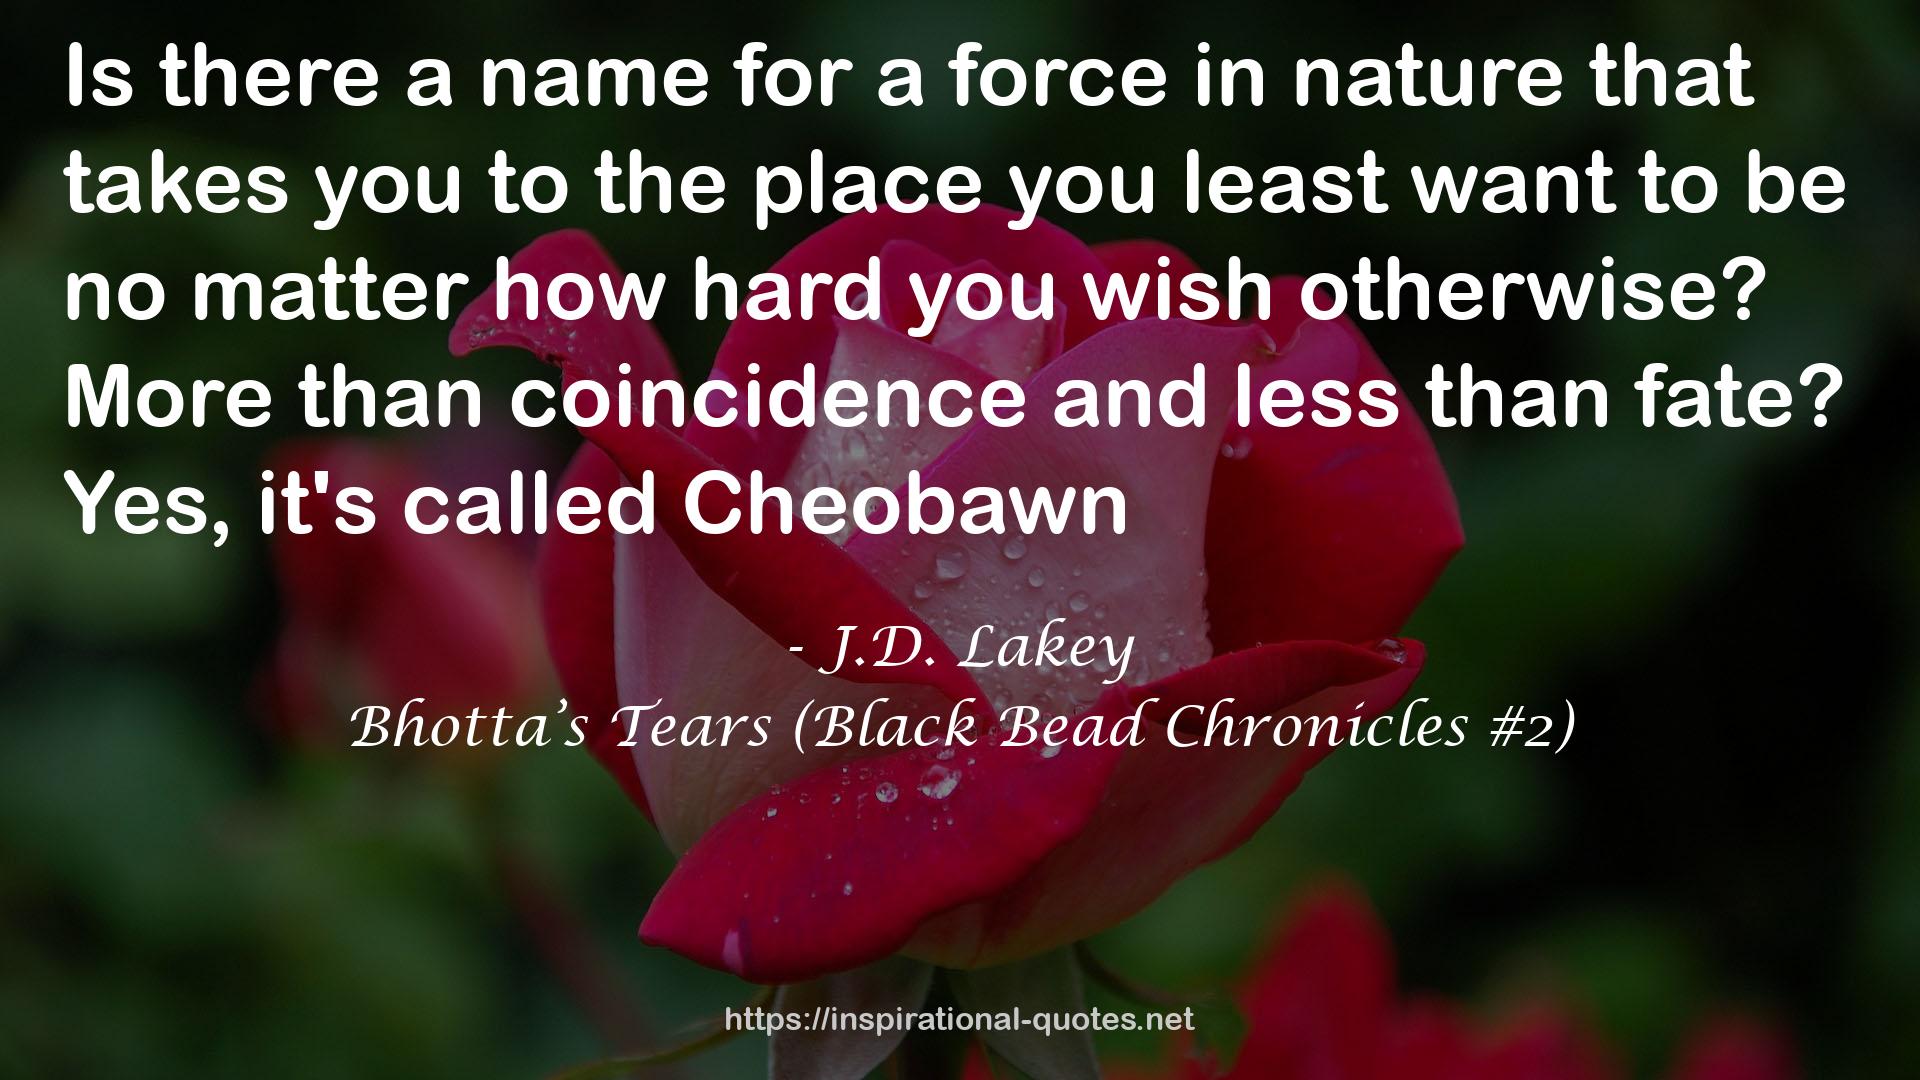 Bhotta’s Tears (Black Bead Chronicles #2) QUOTES